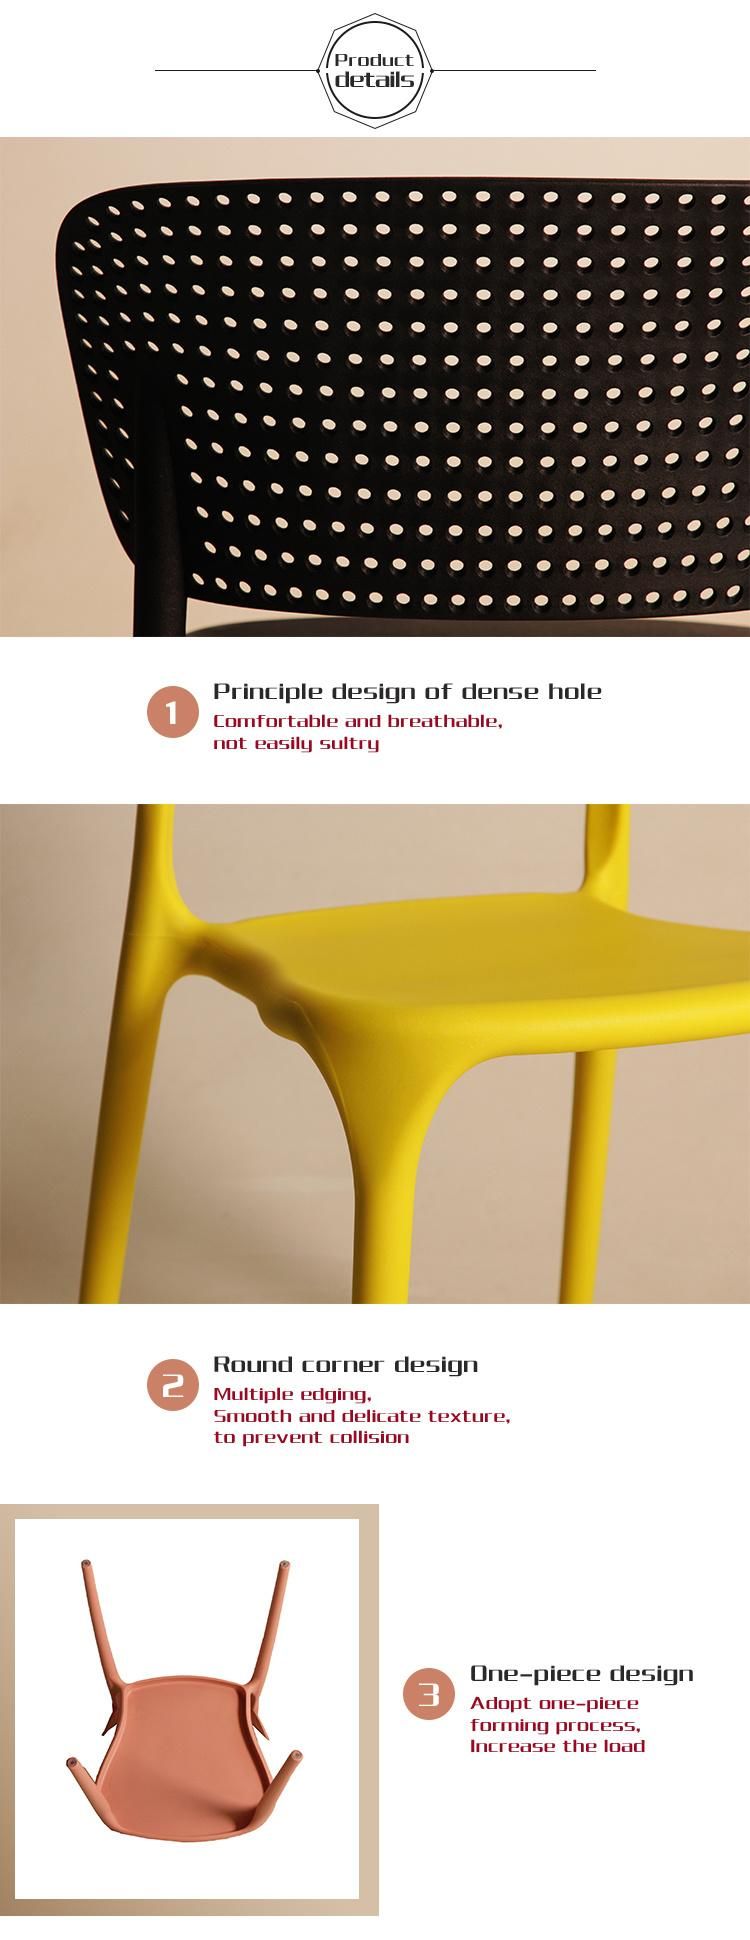 Scandinavian Plastic Chair Recycled Days End Chairs for Young Adults PP Restaurant Cafe Slatted Ceremony Empilable